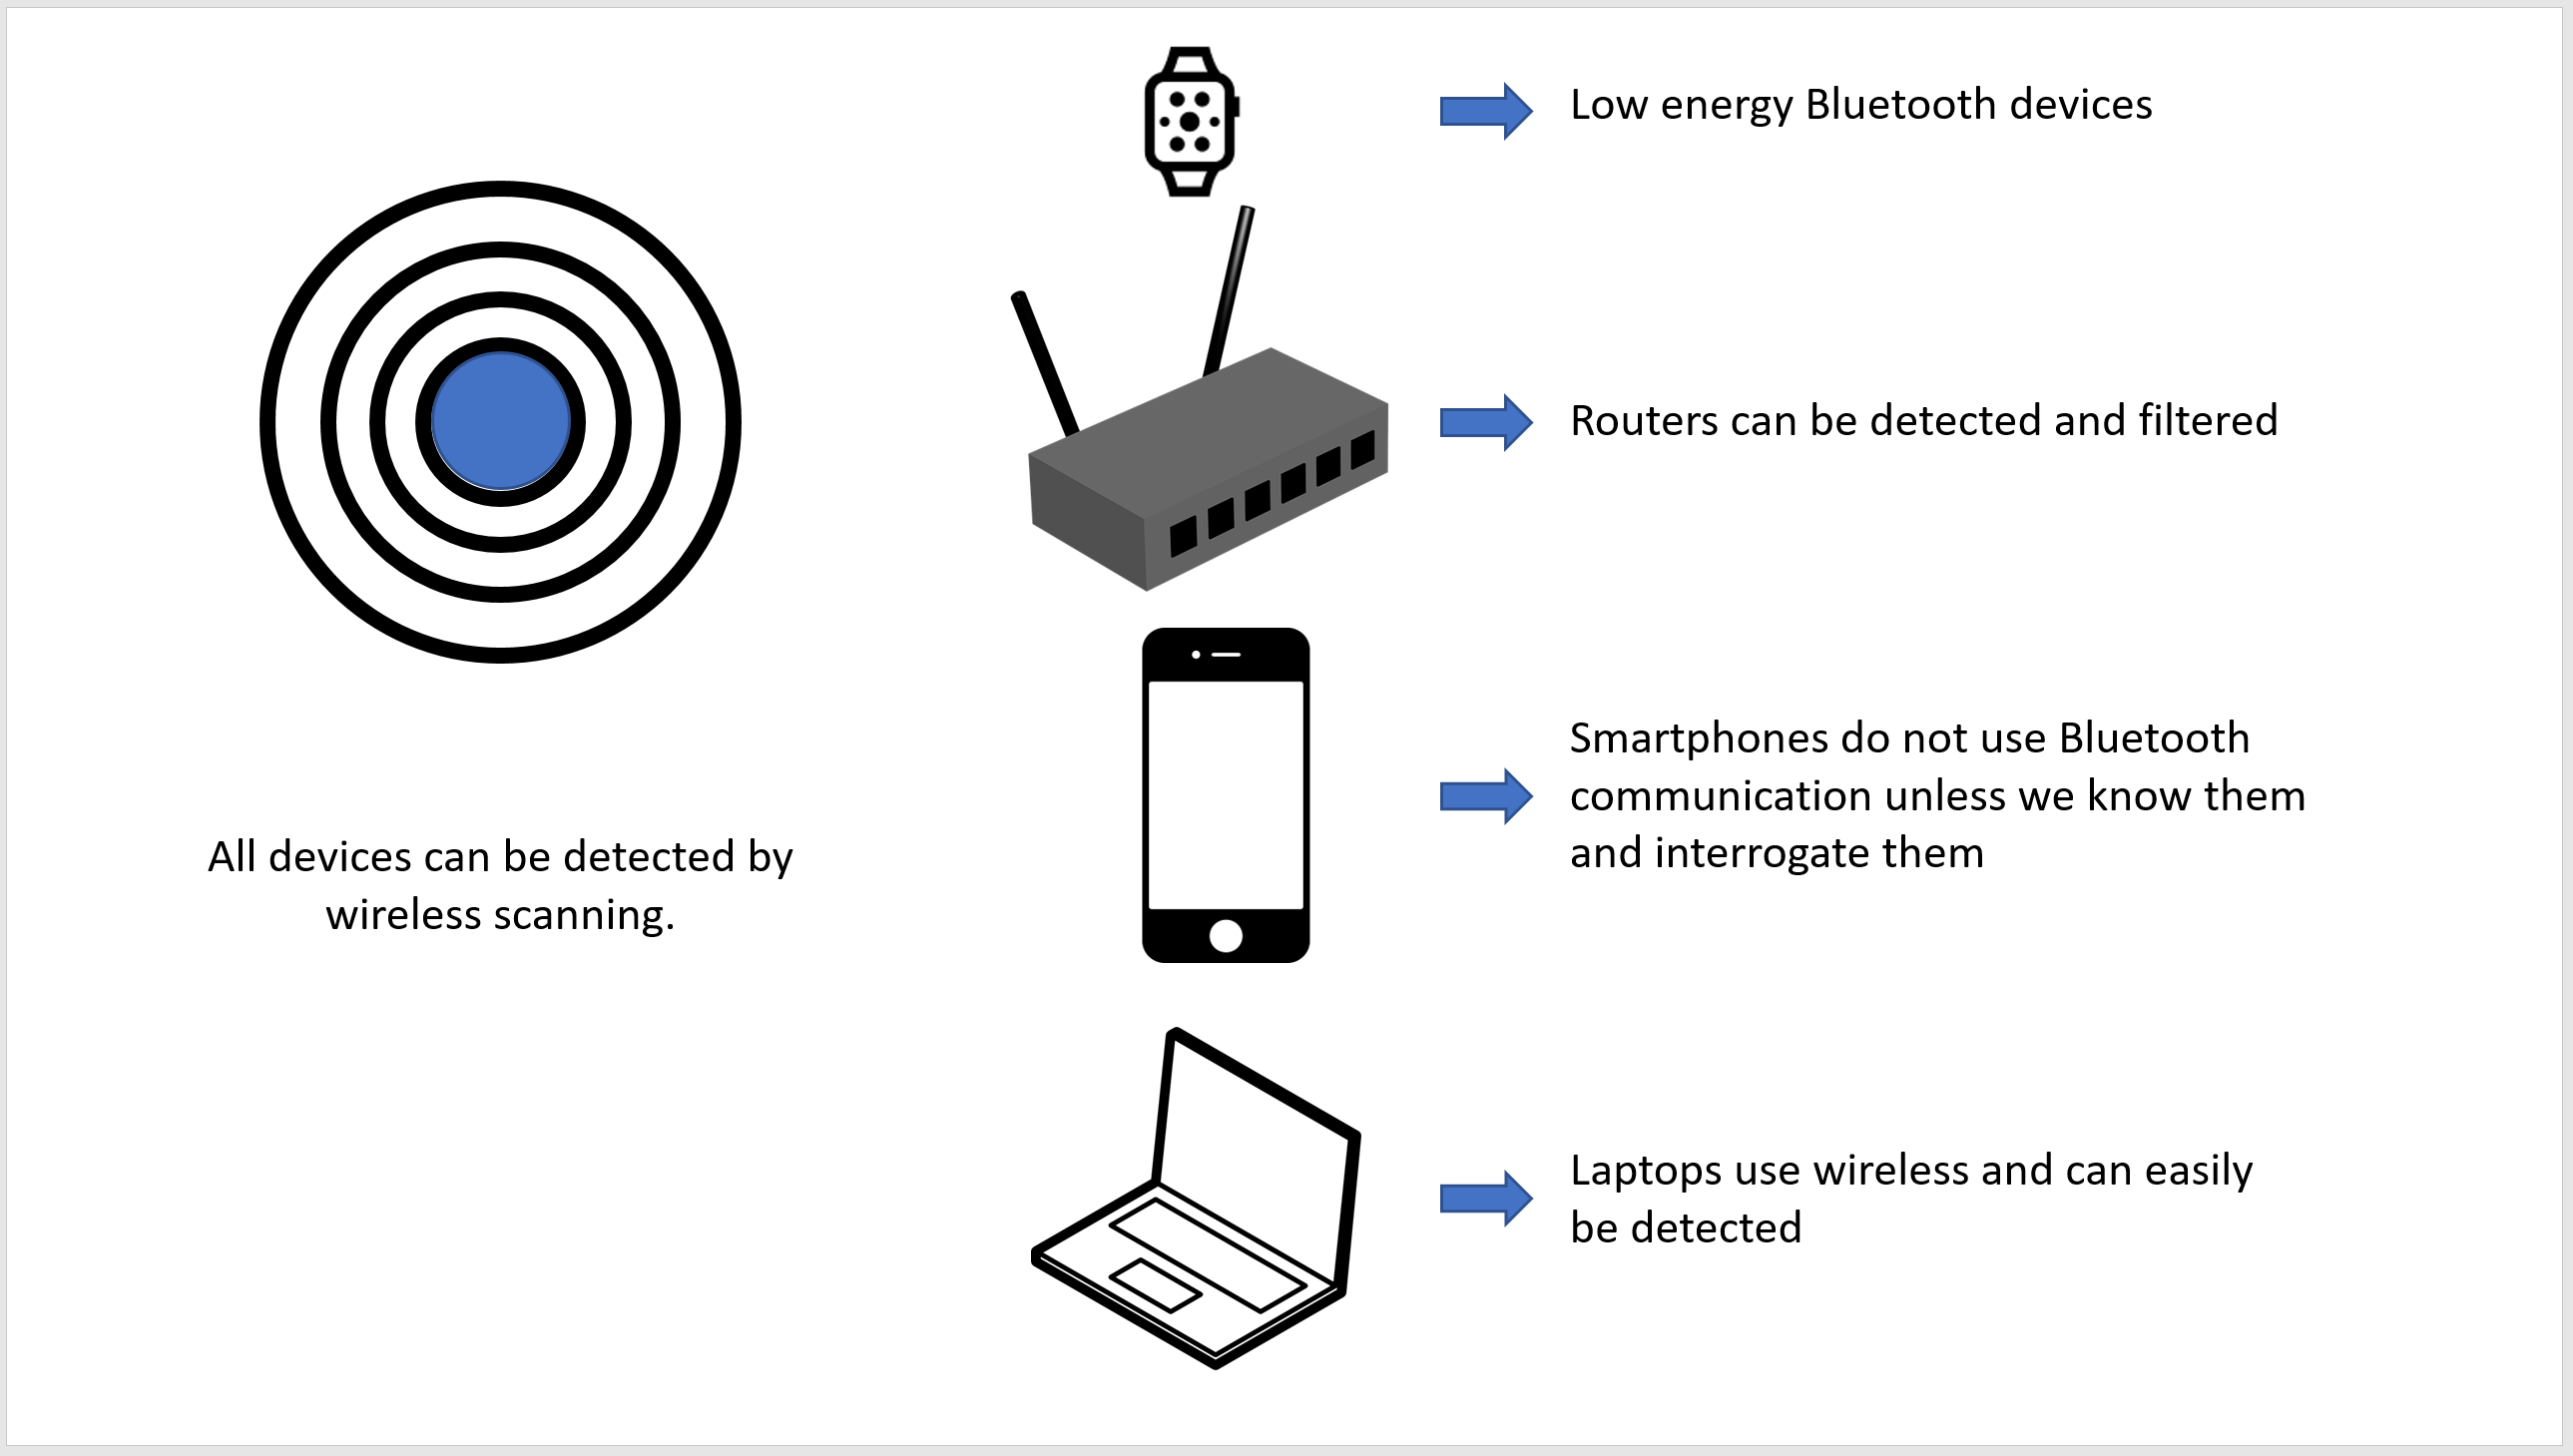 Detectable devices by wireless scanning